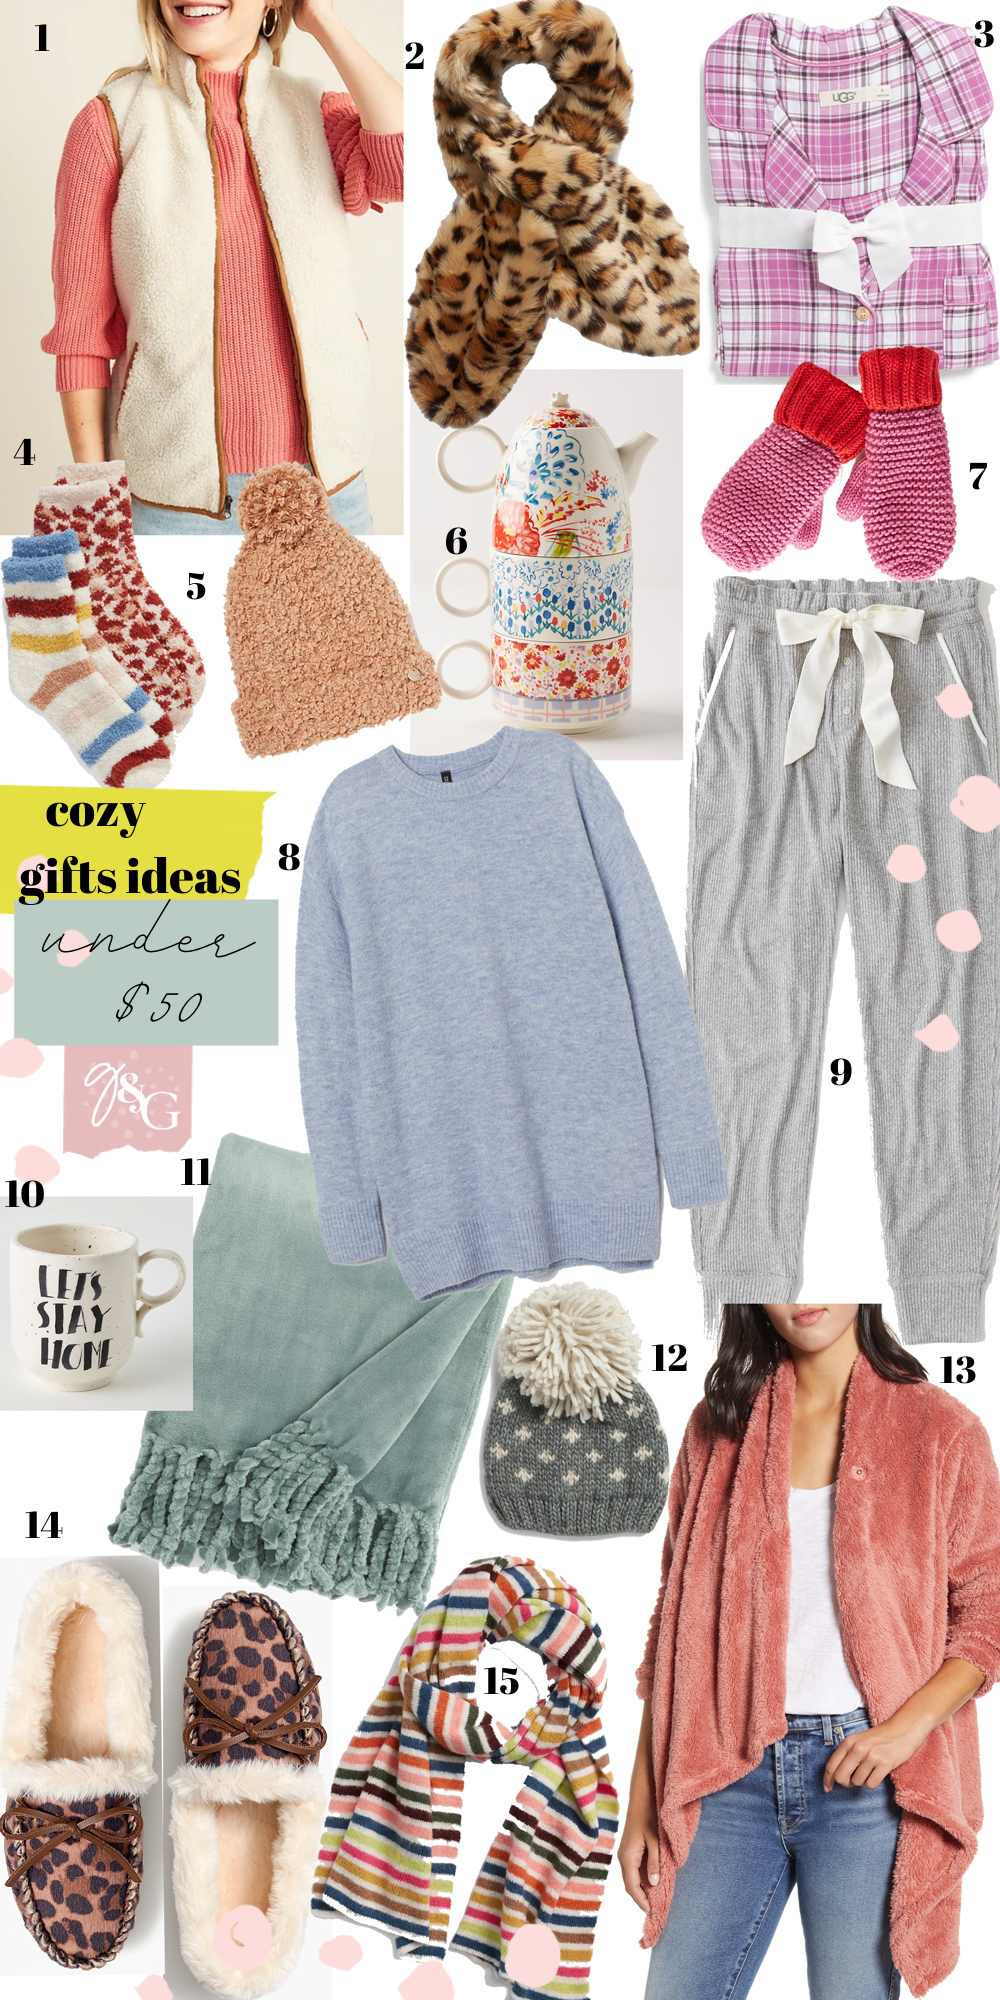 Cozy Gifts Under 50 / Glitter & Gingham Gift Guide 